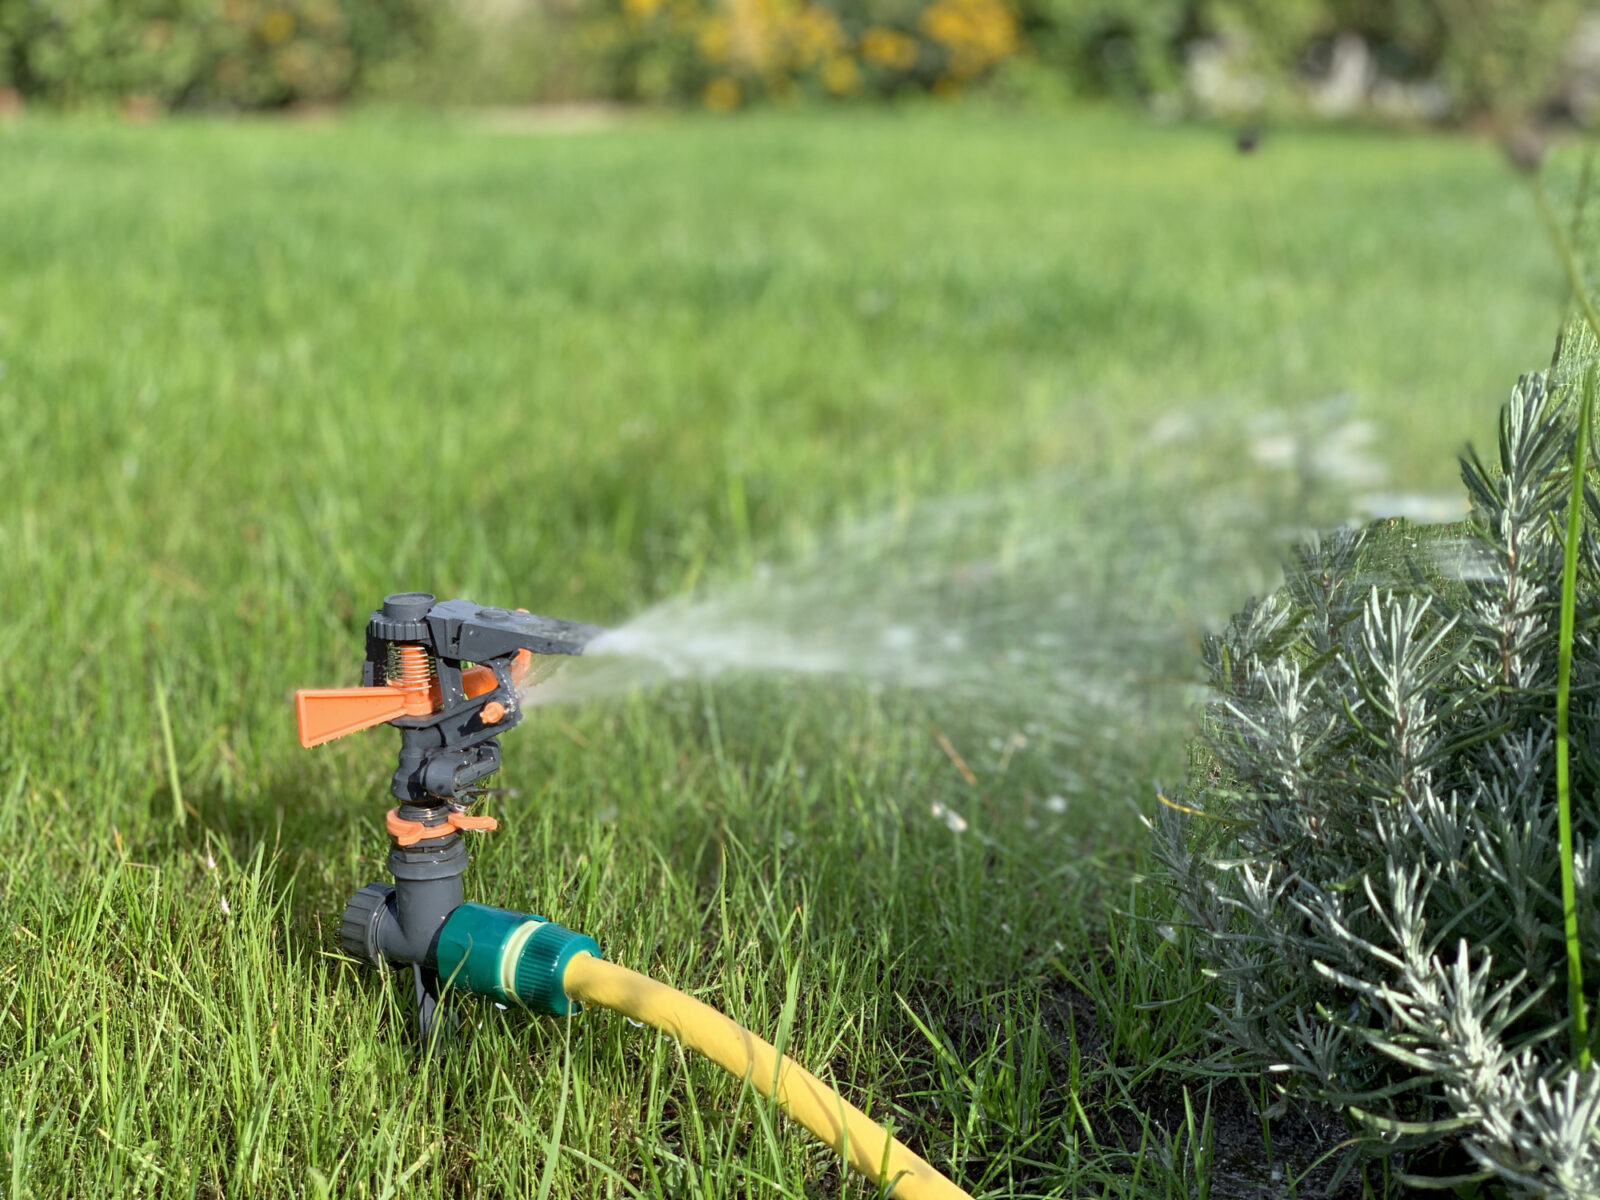 Choosing the Right Sprinkler Head for Your Property sposato irrigation